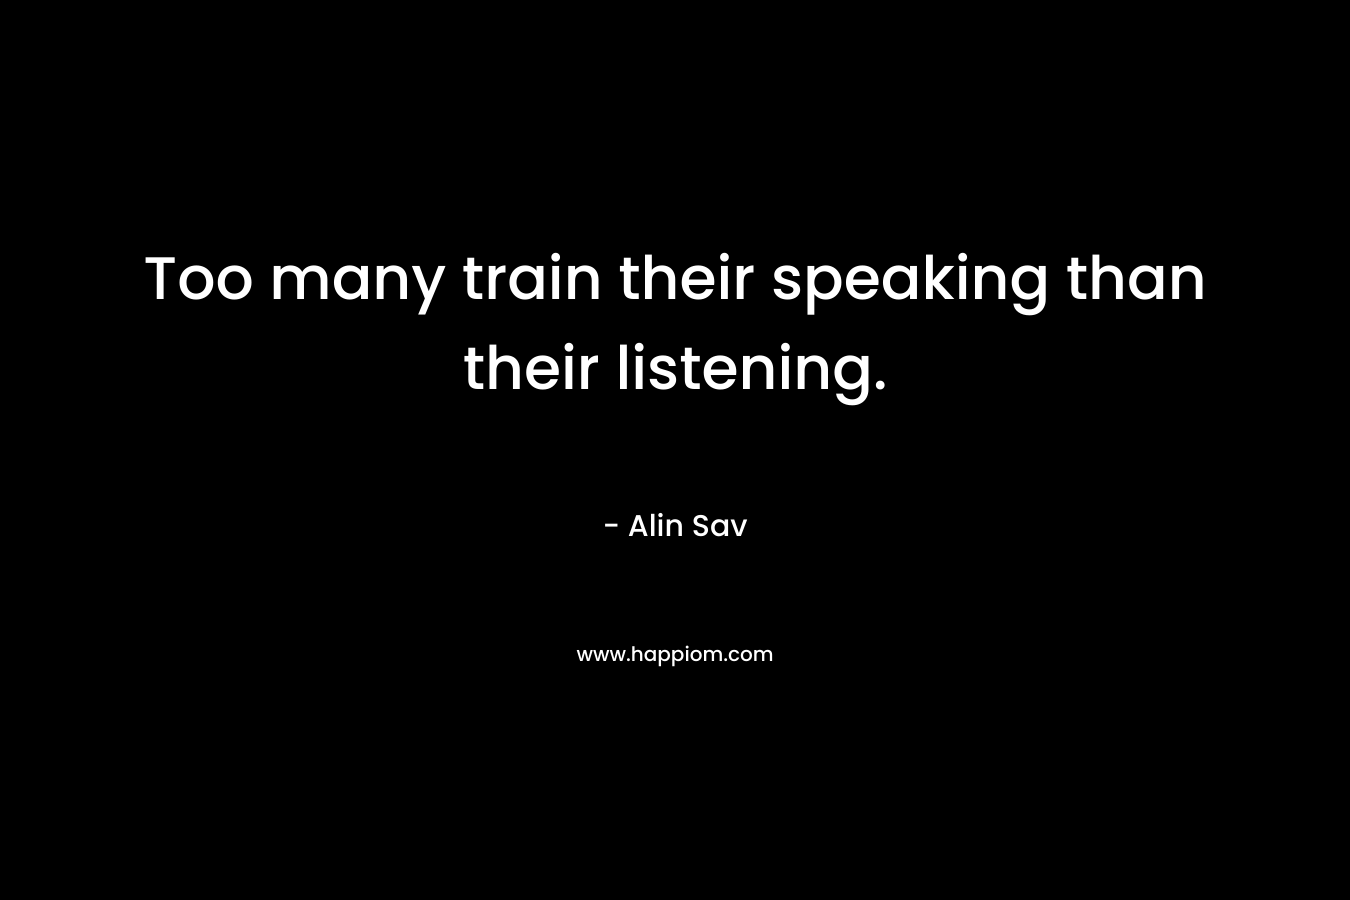 Too many train their speaking than their listening.